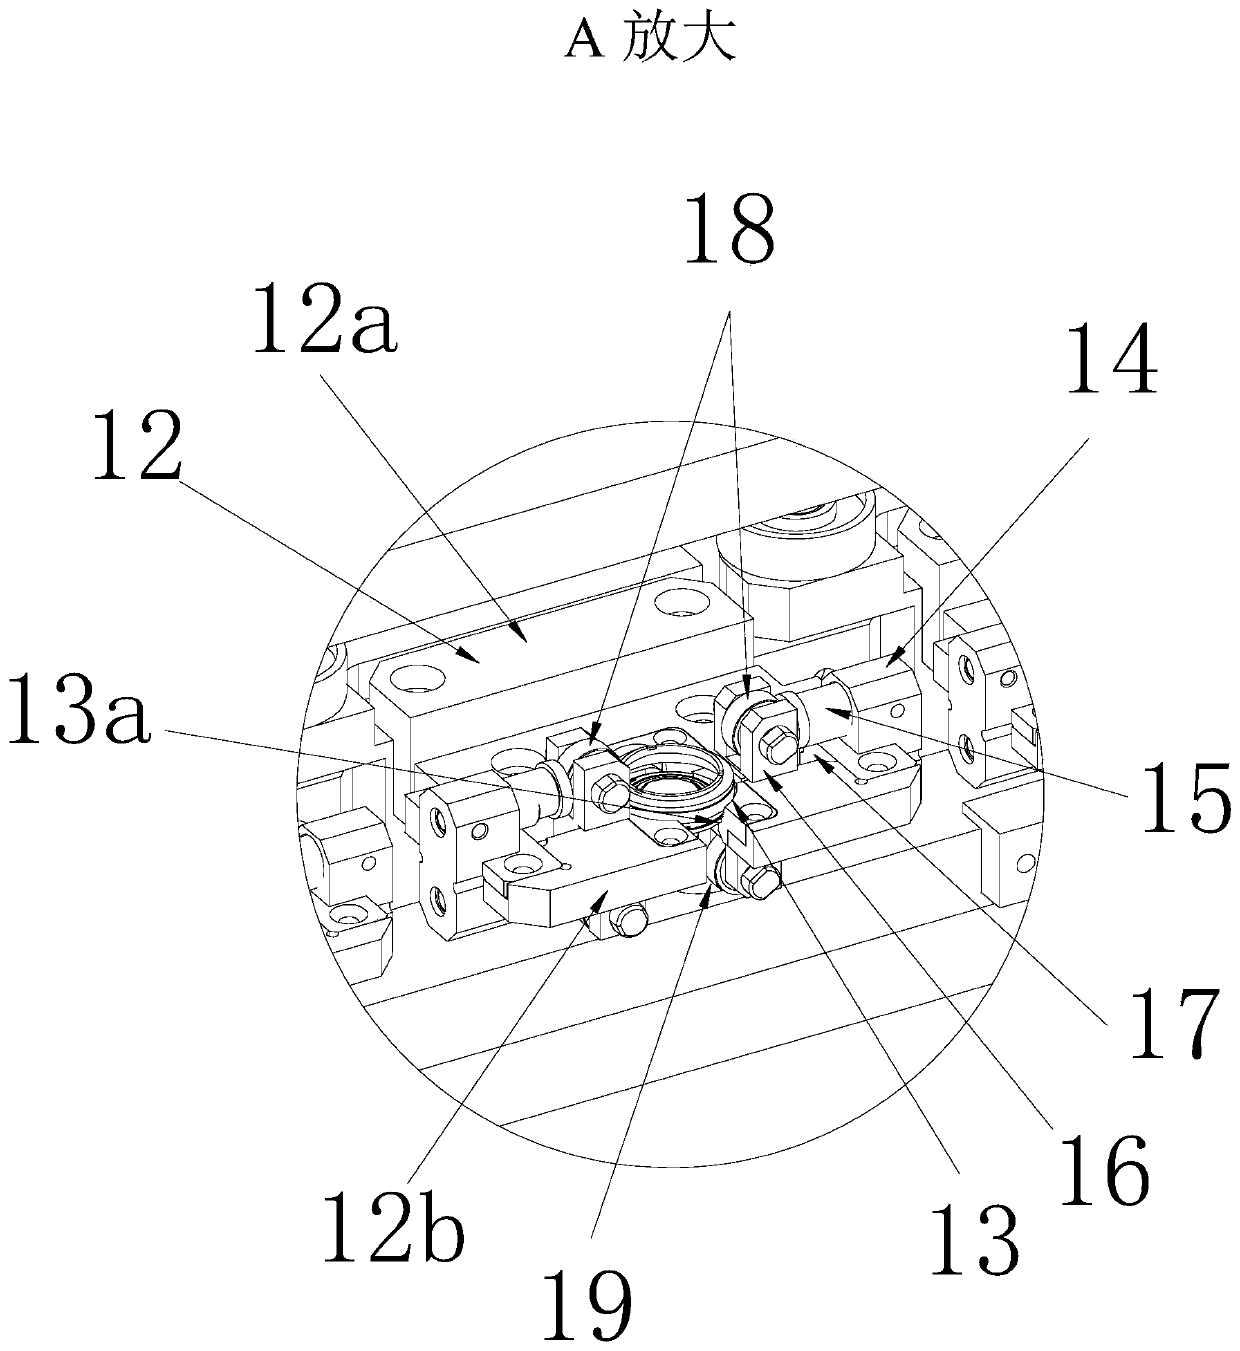 Annular conveying mechanism for assembling cylindrical lithium ion battery cap assembly